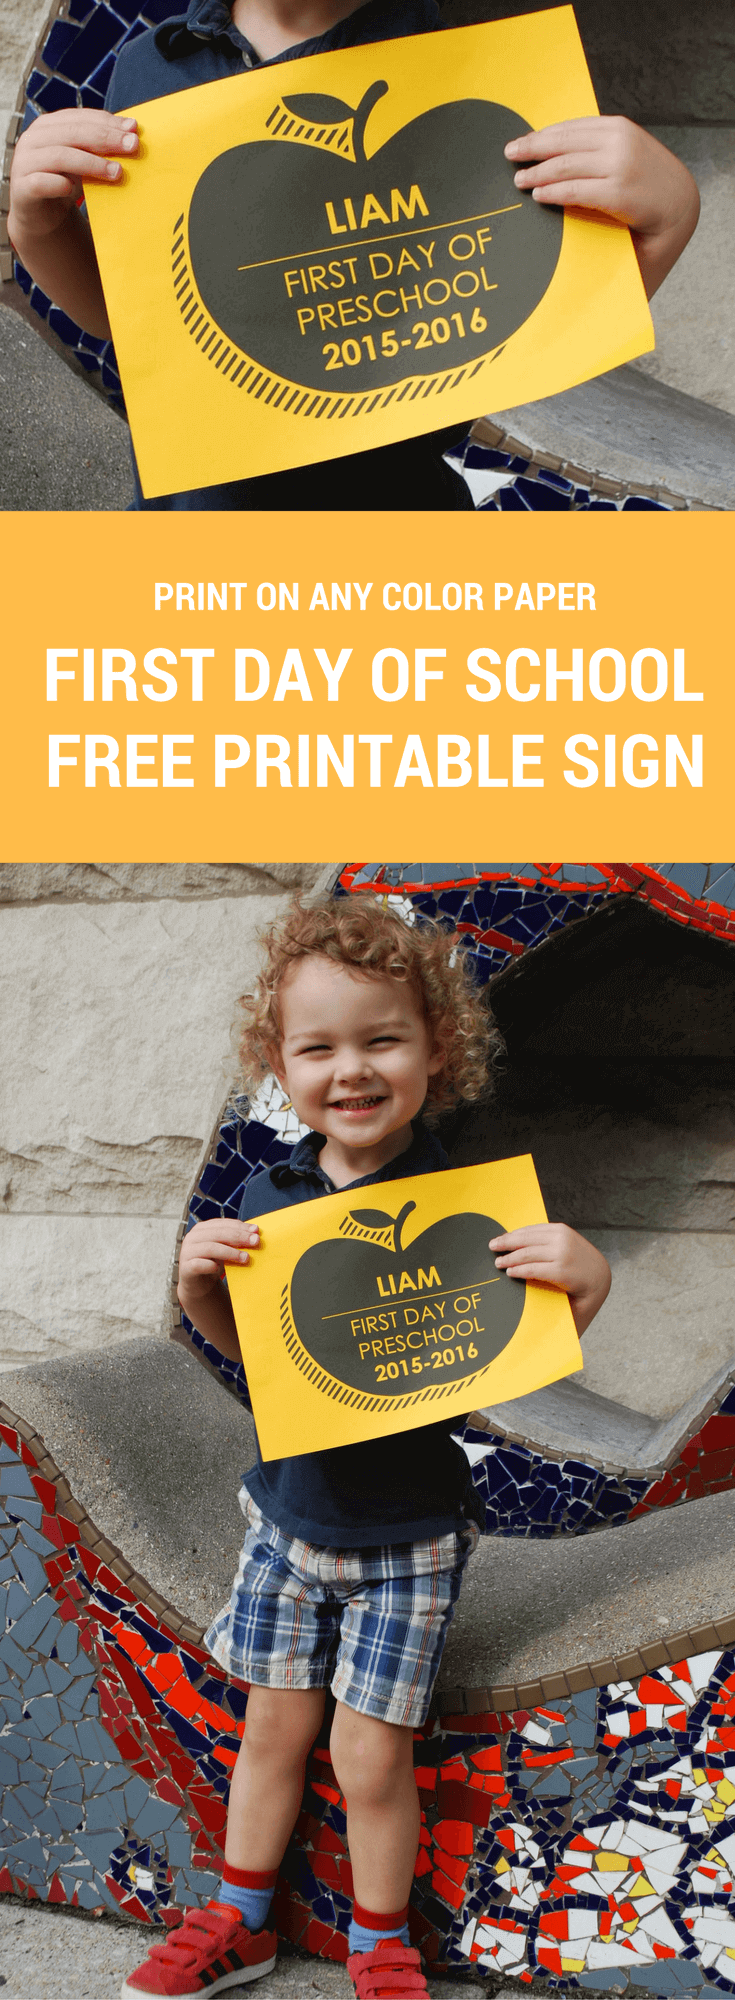 Free Personalized First Day of School printable sign. Just download, type to personalize, and print on any color paper you wish!